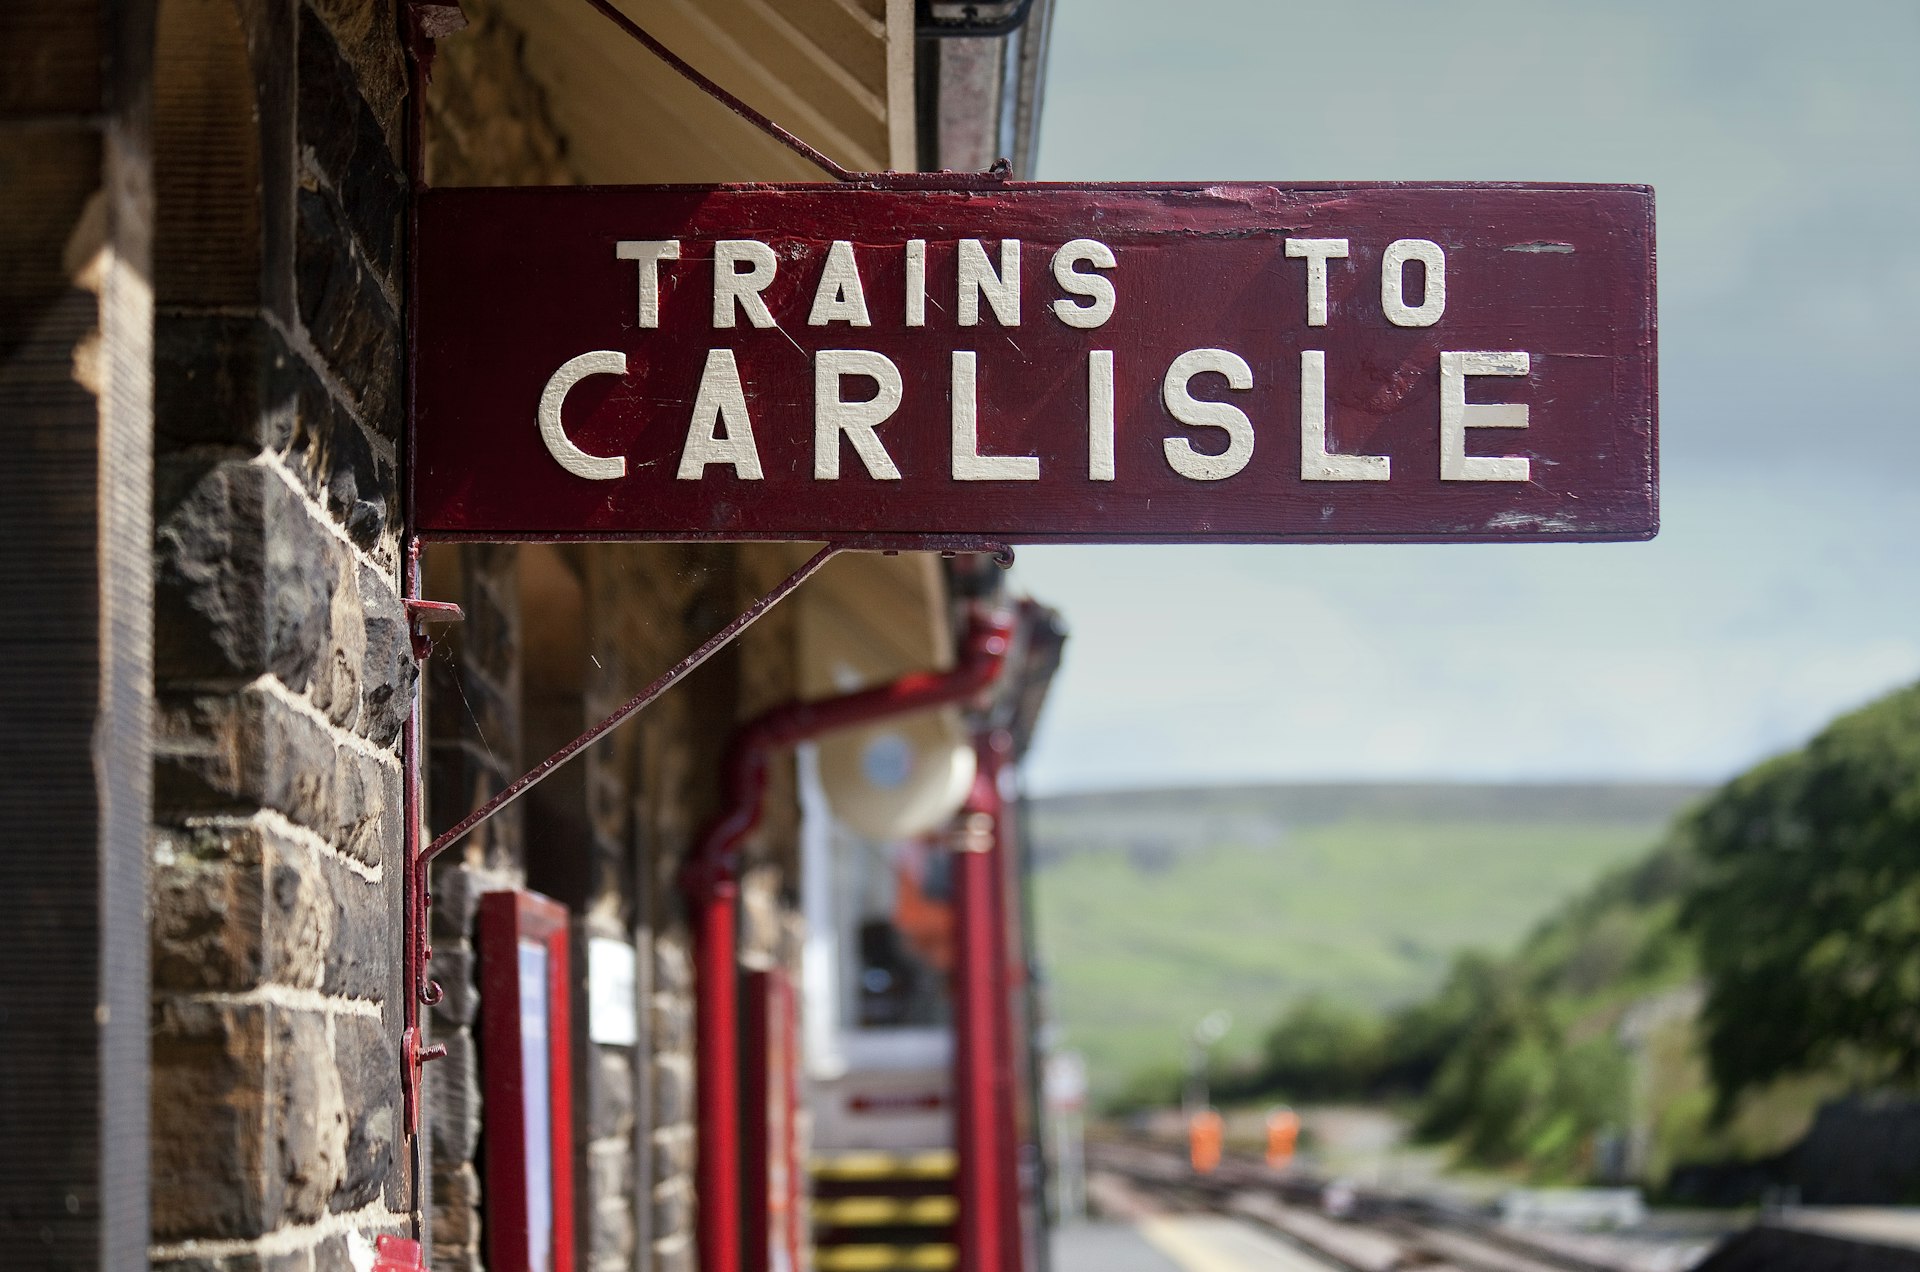 A railway station sign at Garsdale Head in Cumbria, England